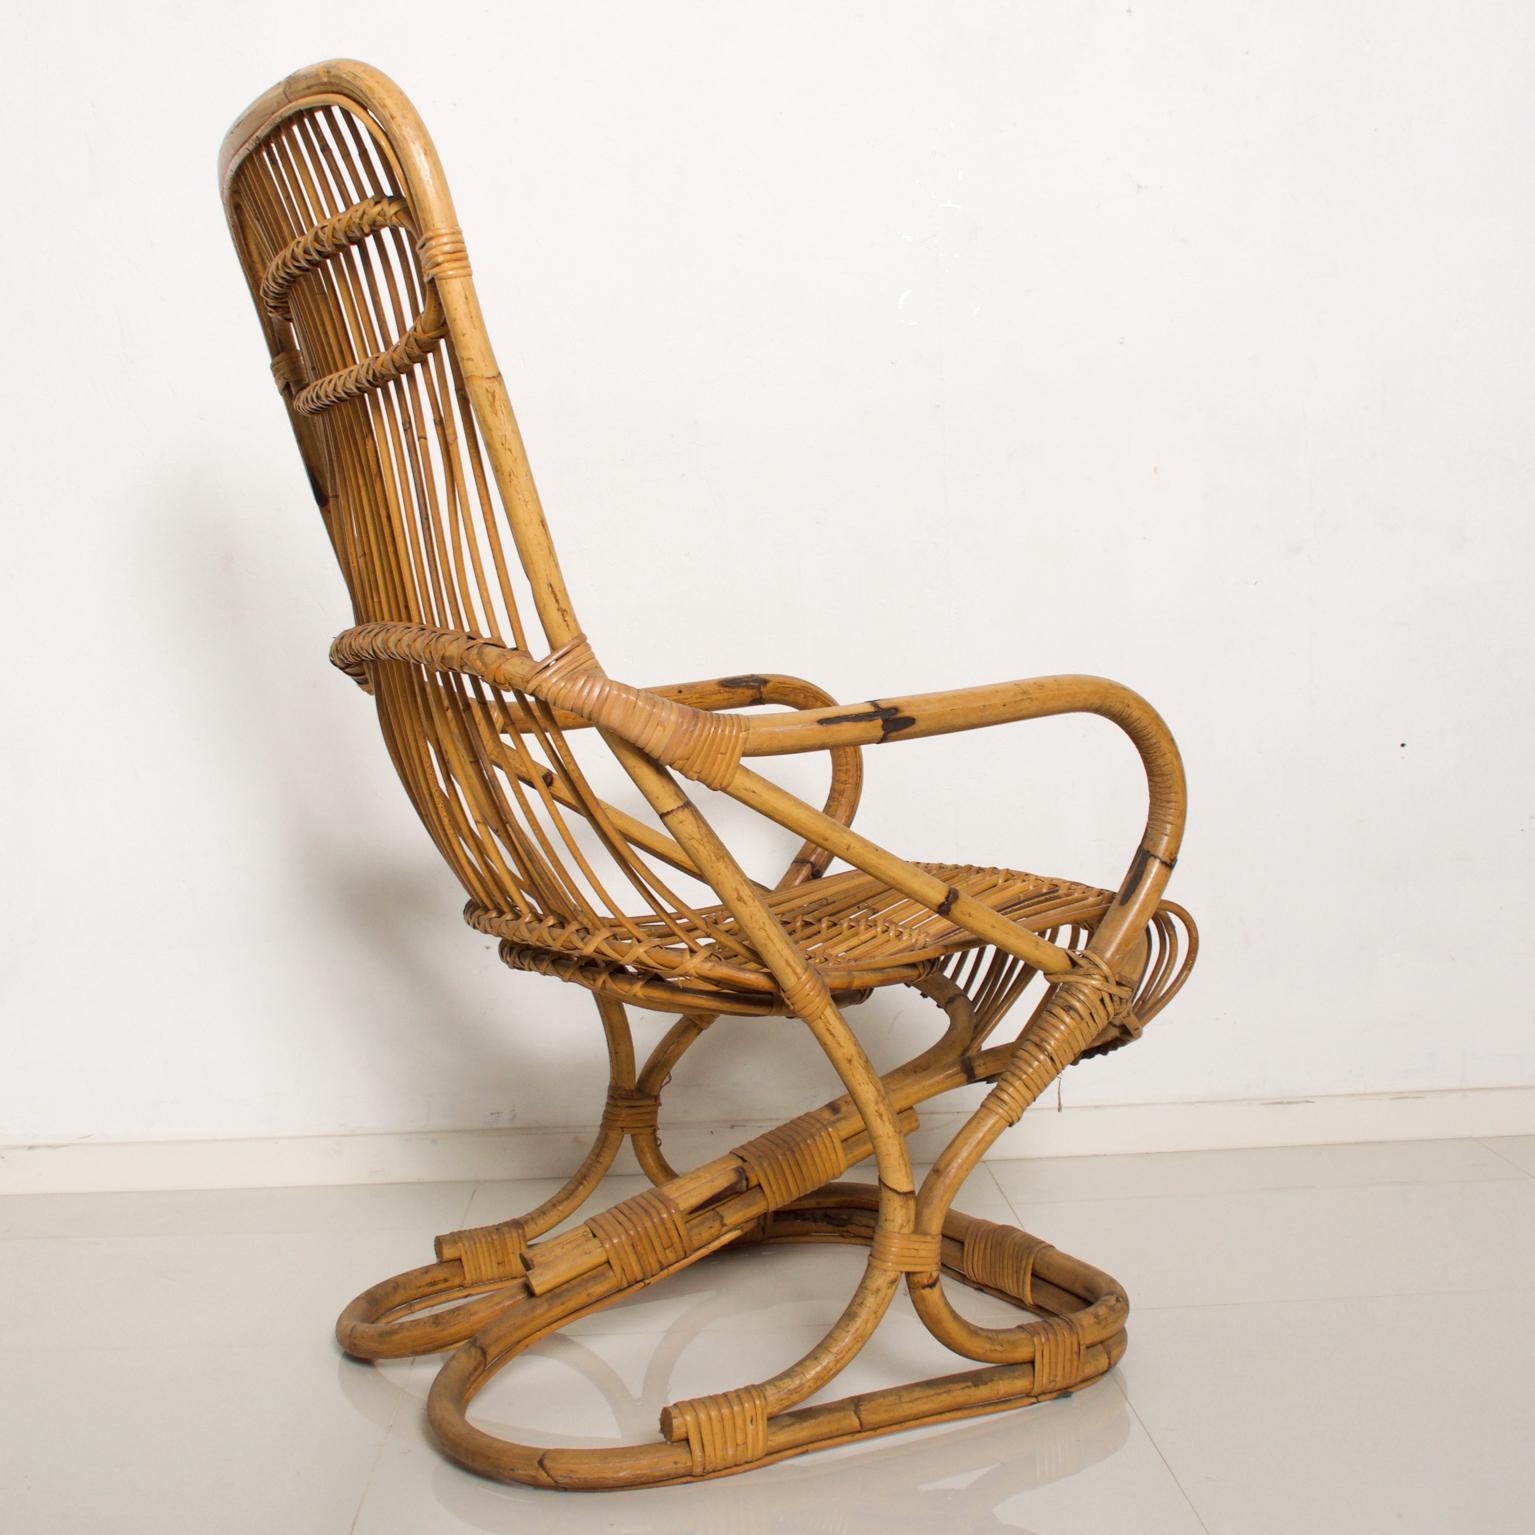 Mid-20th Century Italian Patio Golden Woven Rattan & Bamboo Comfy Lounge Chair Modern Italy 1950s